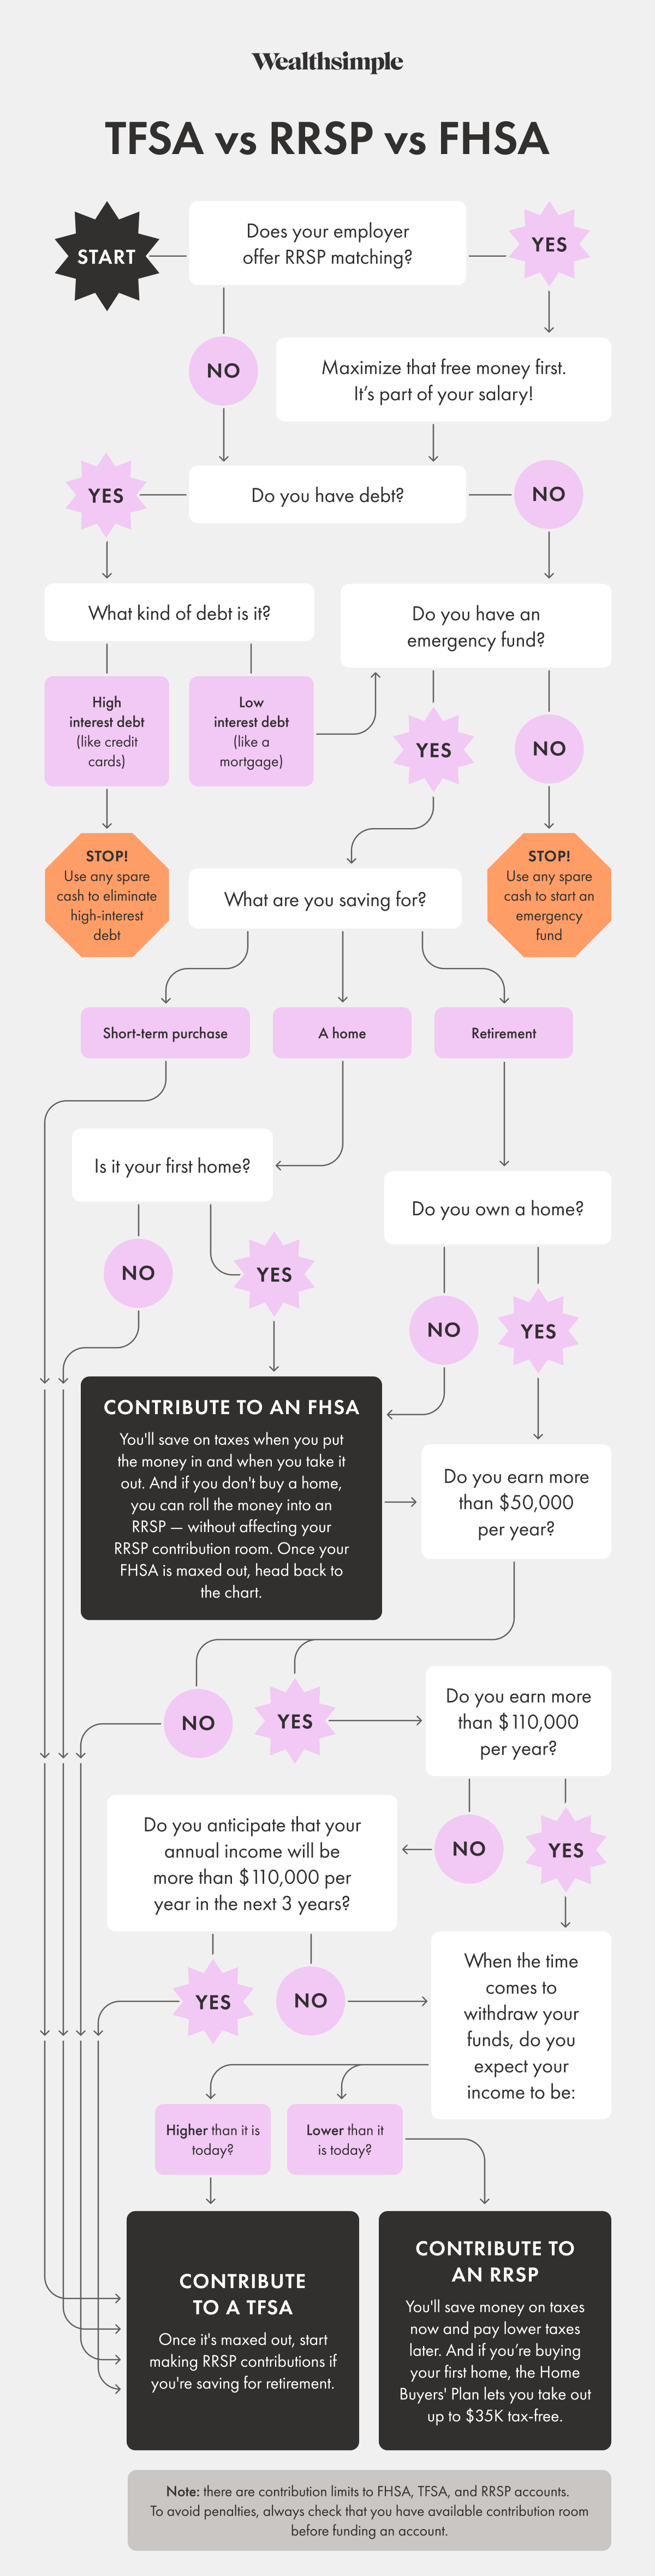 RRSP vs TFSA vs FHSA flowchart shows how to choose the best account for you